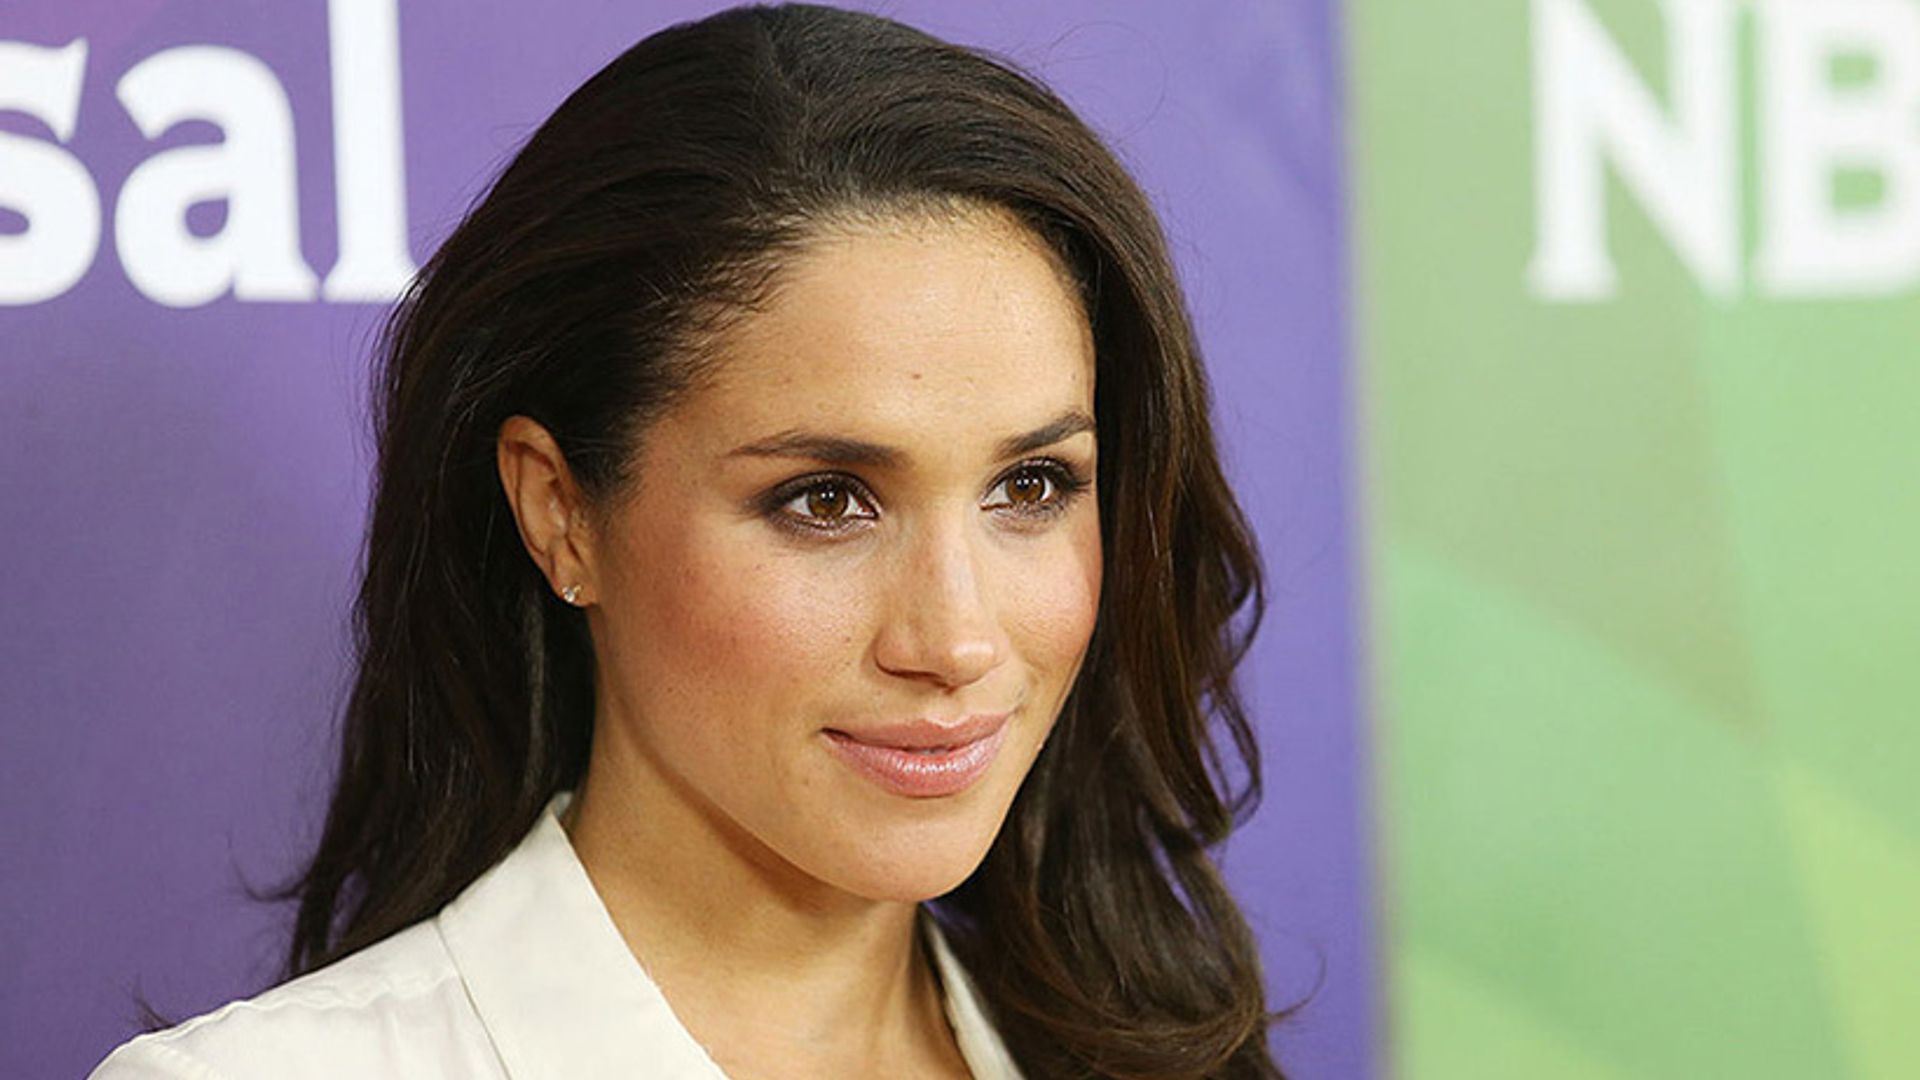 5 things we learned about Meghan Markle from her Vanity Fair feature